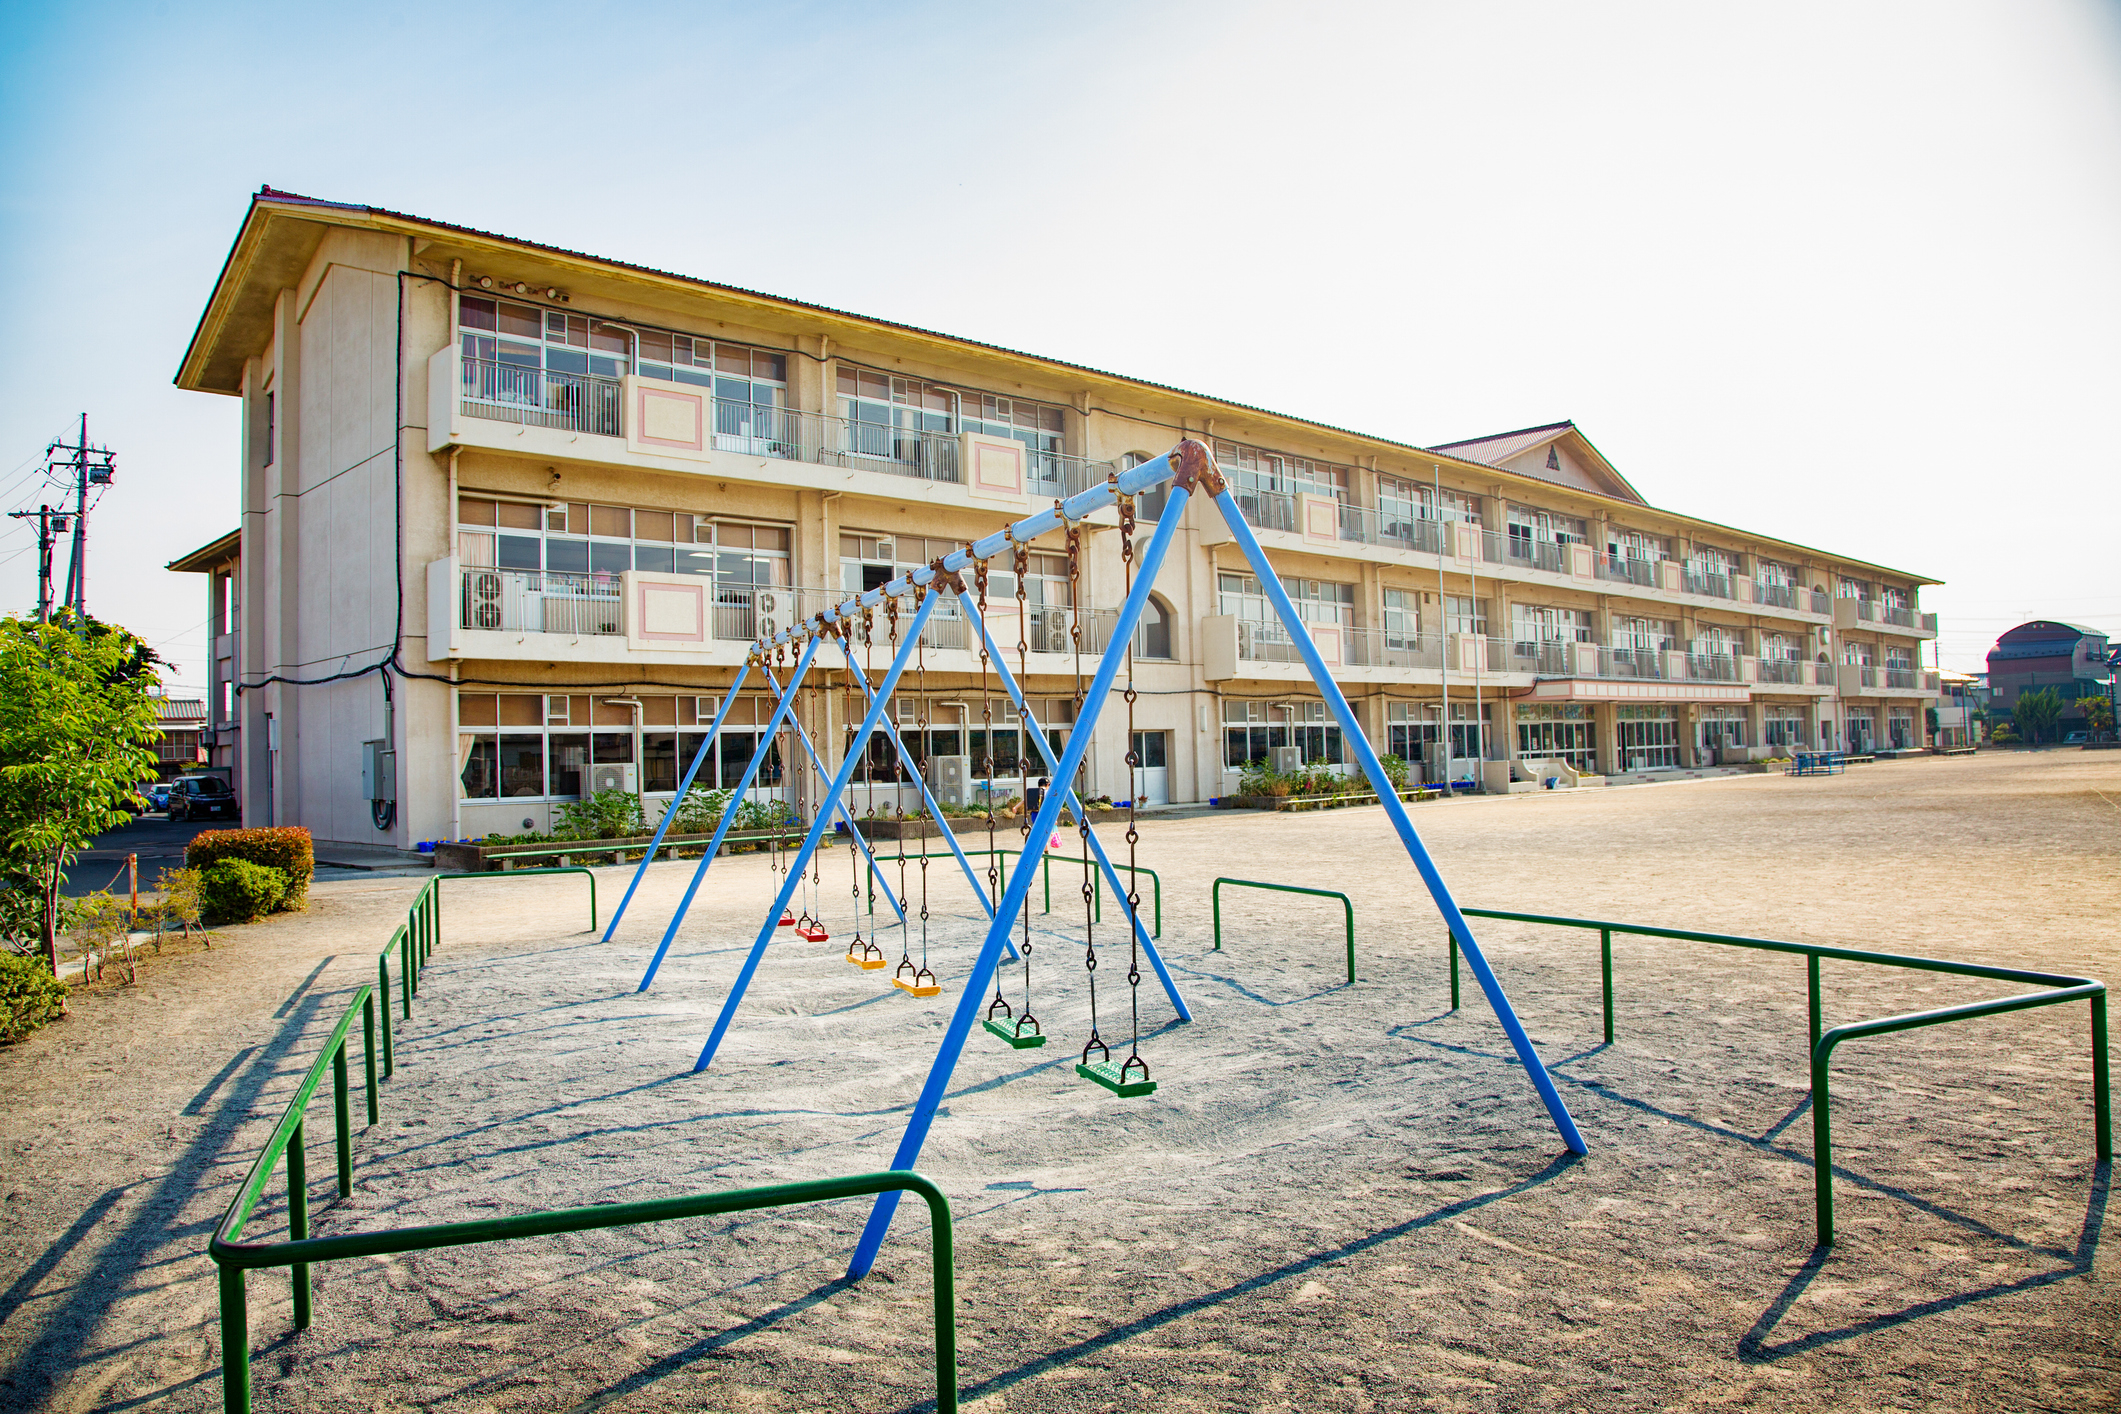 Playground with a swing and climbing structure in front of a multi-story motel during daytime